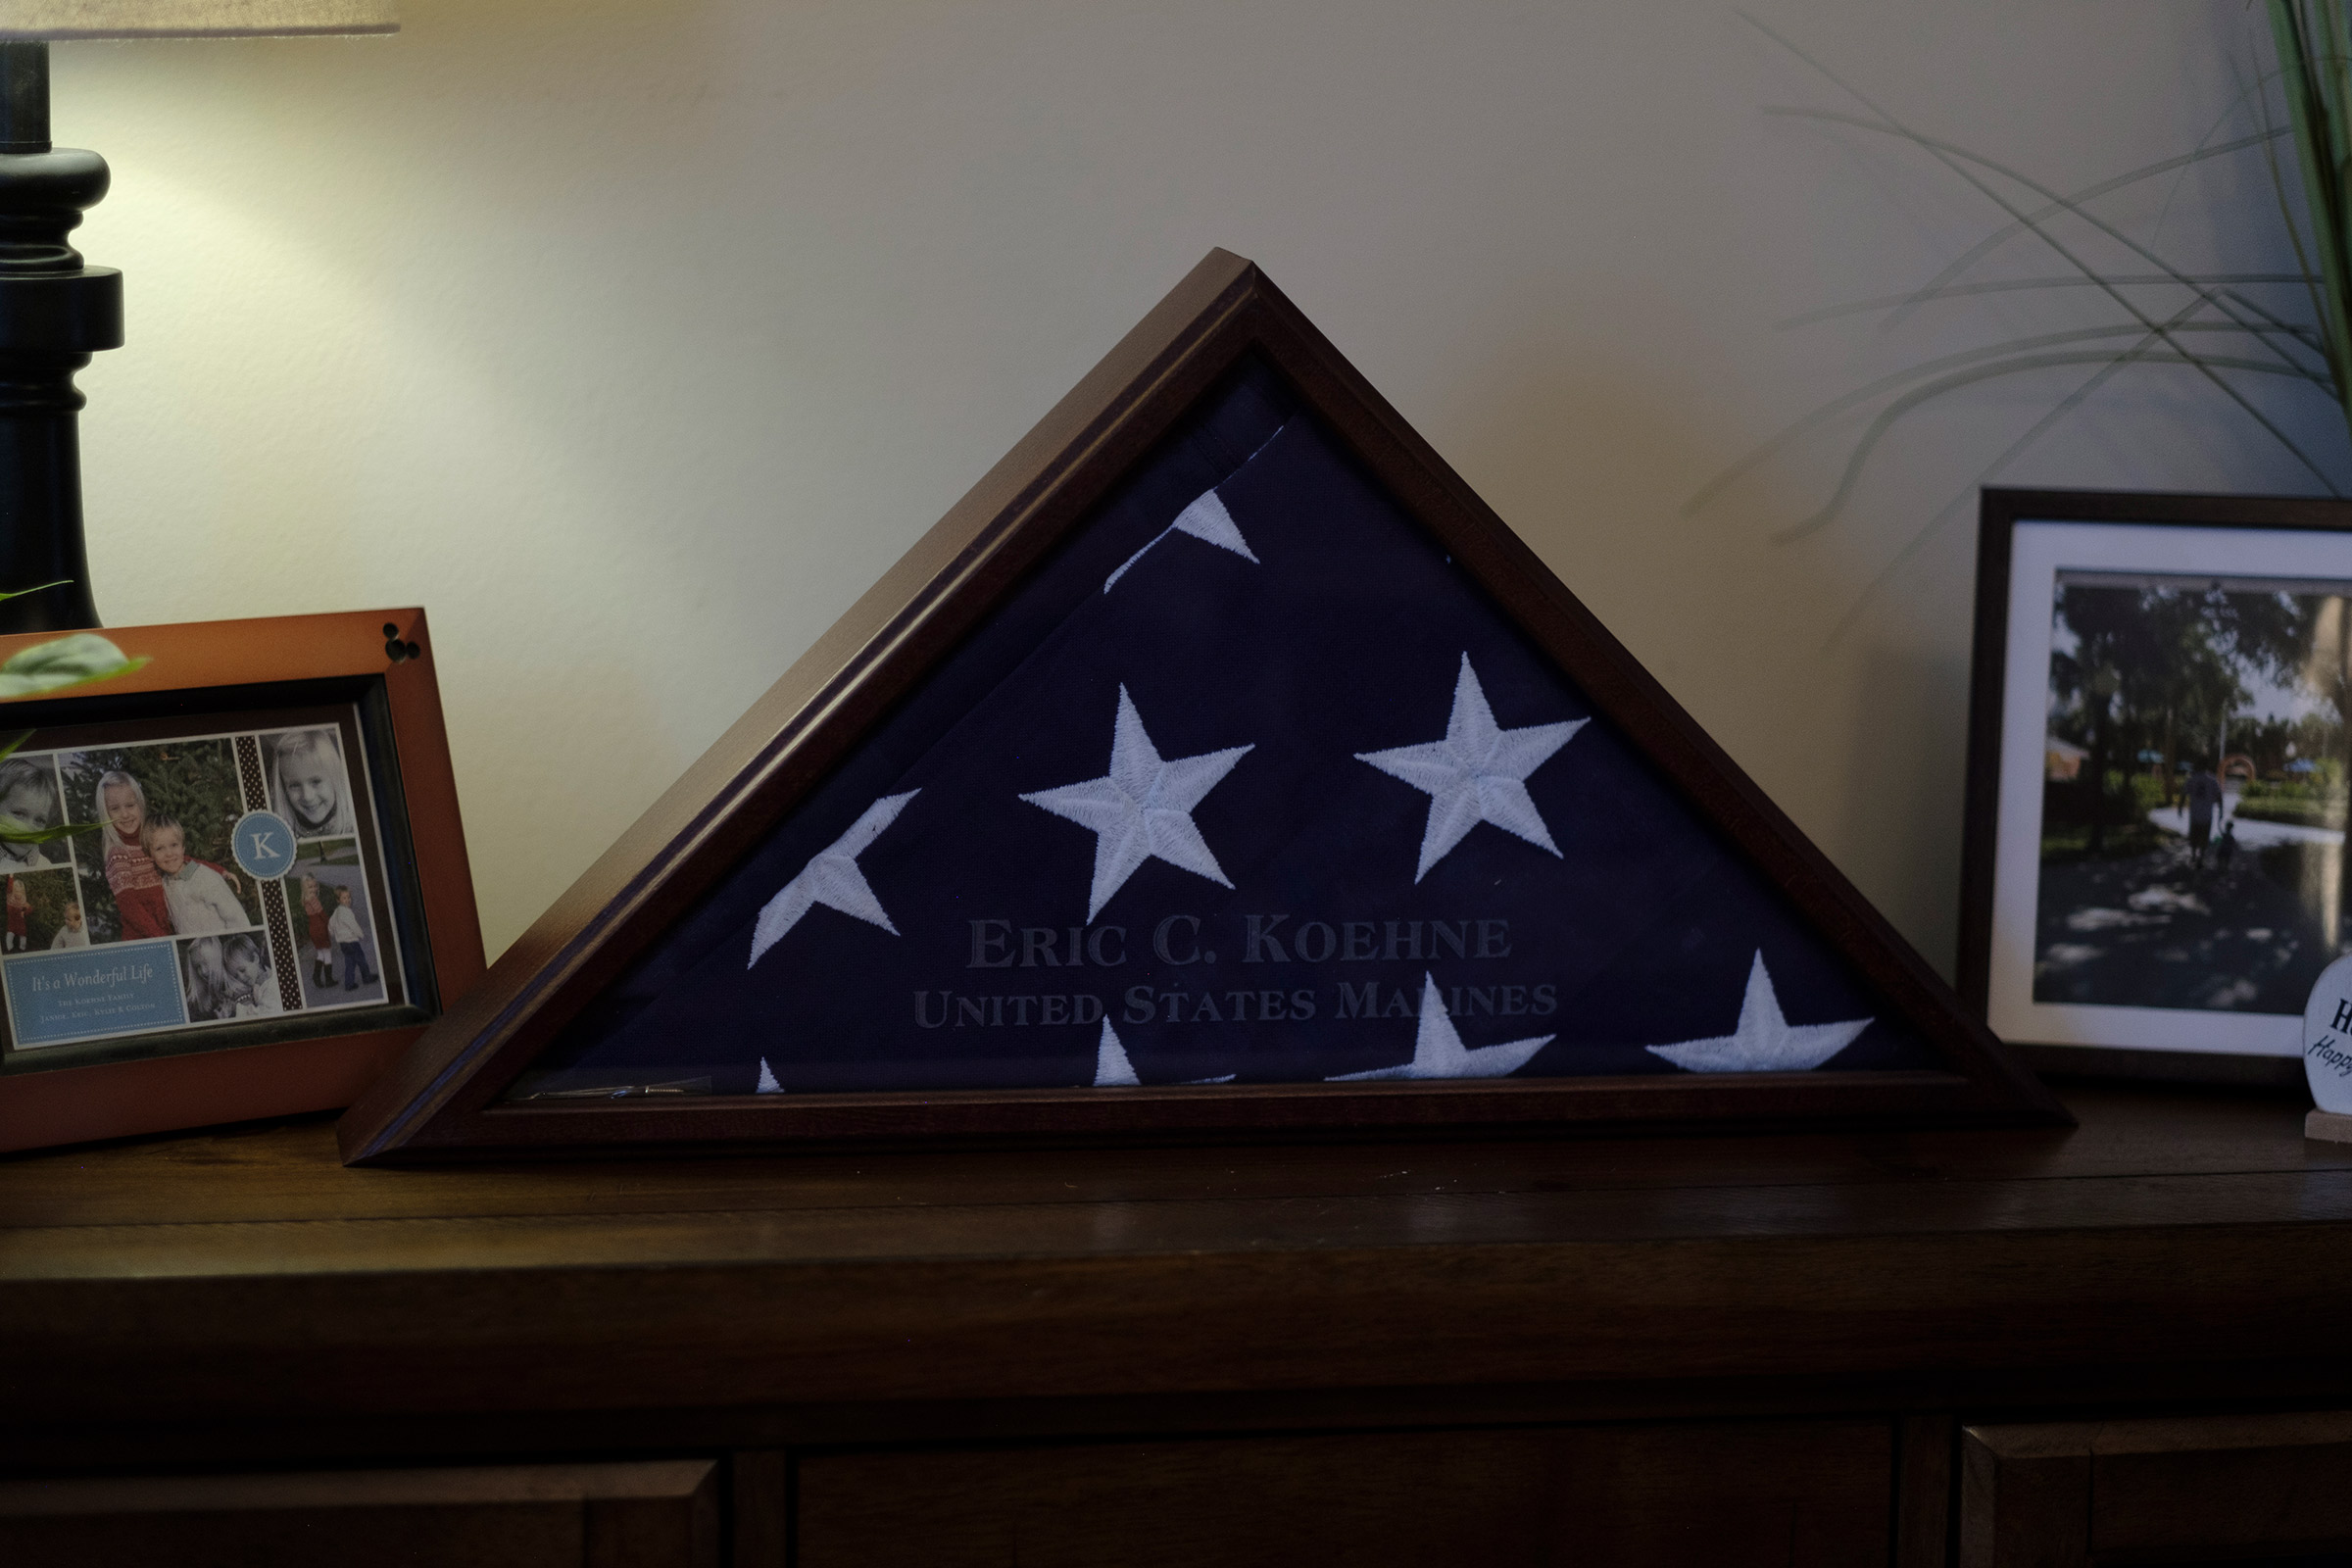 A burial flag for Eric Koehne, who passed away from COVID-19, is displayed in the living room of the Koehne family. Lyndhurst, New Jersey, 2021 © Sean Sirota for Time Magazine